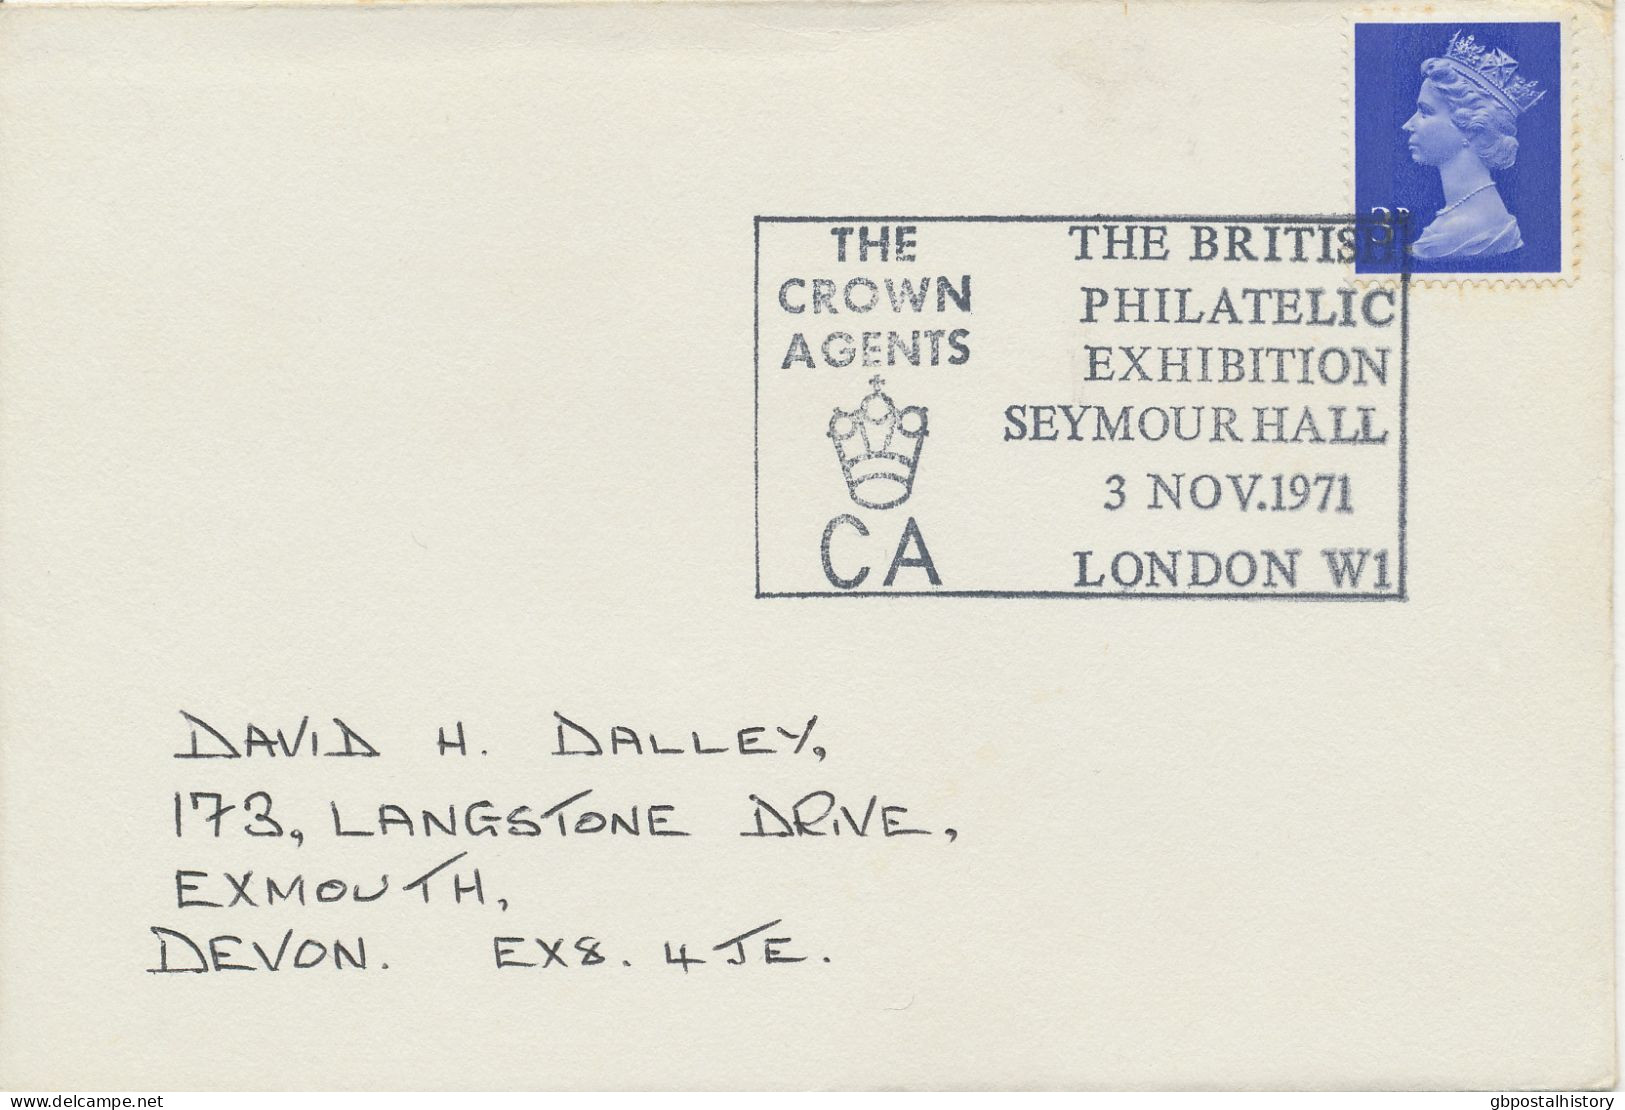 GB SPECIAL EVENT POSTMARKS 1971 THE BRITISH PHILATELIC EXHIBITION SEYMOUR HALL LONDON W.I. - THE CROWN AGENTS - Brieven En Documenten